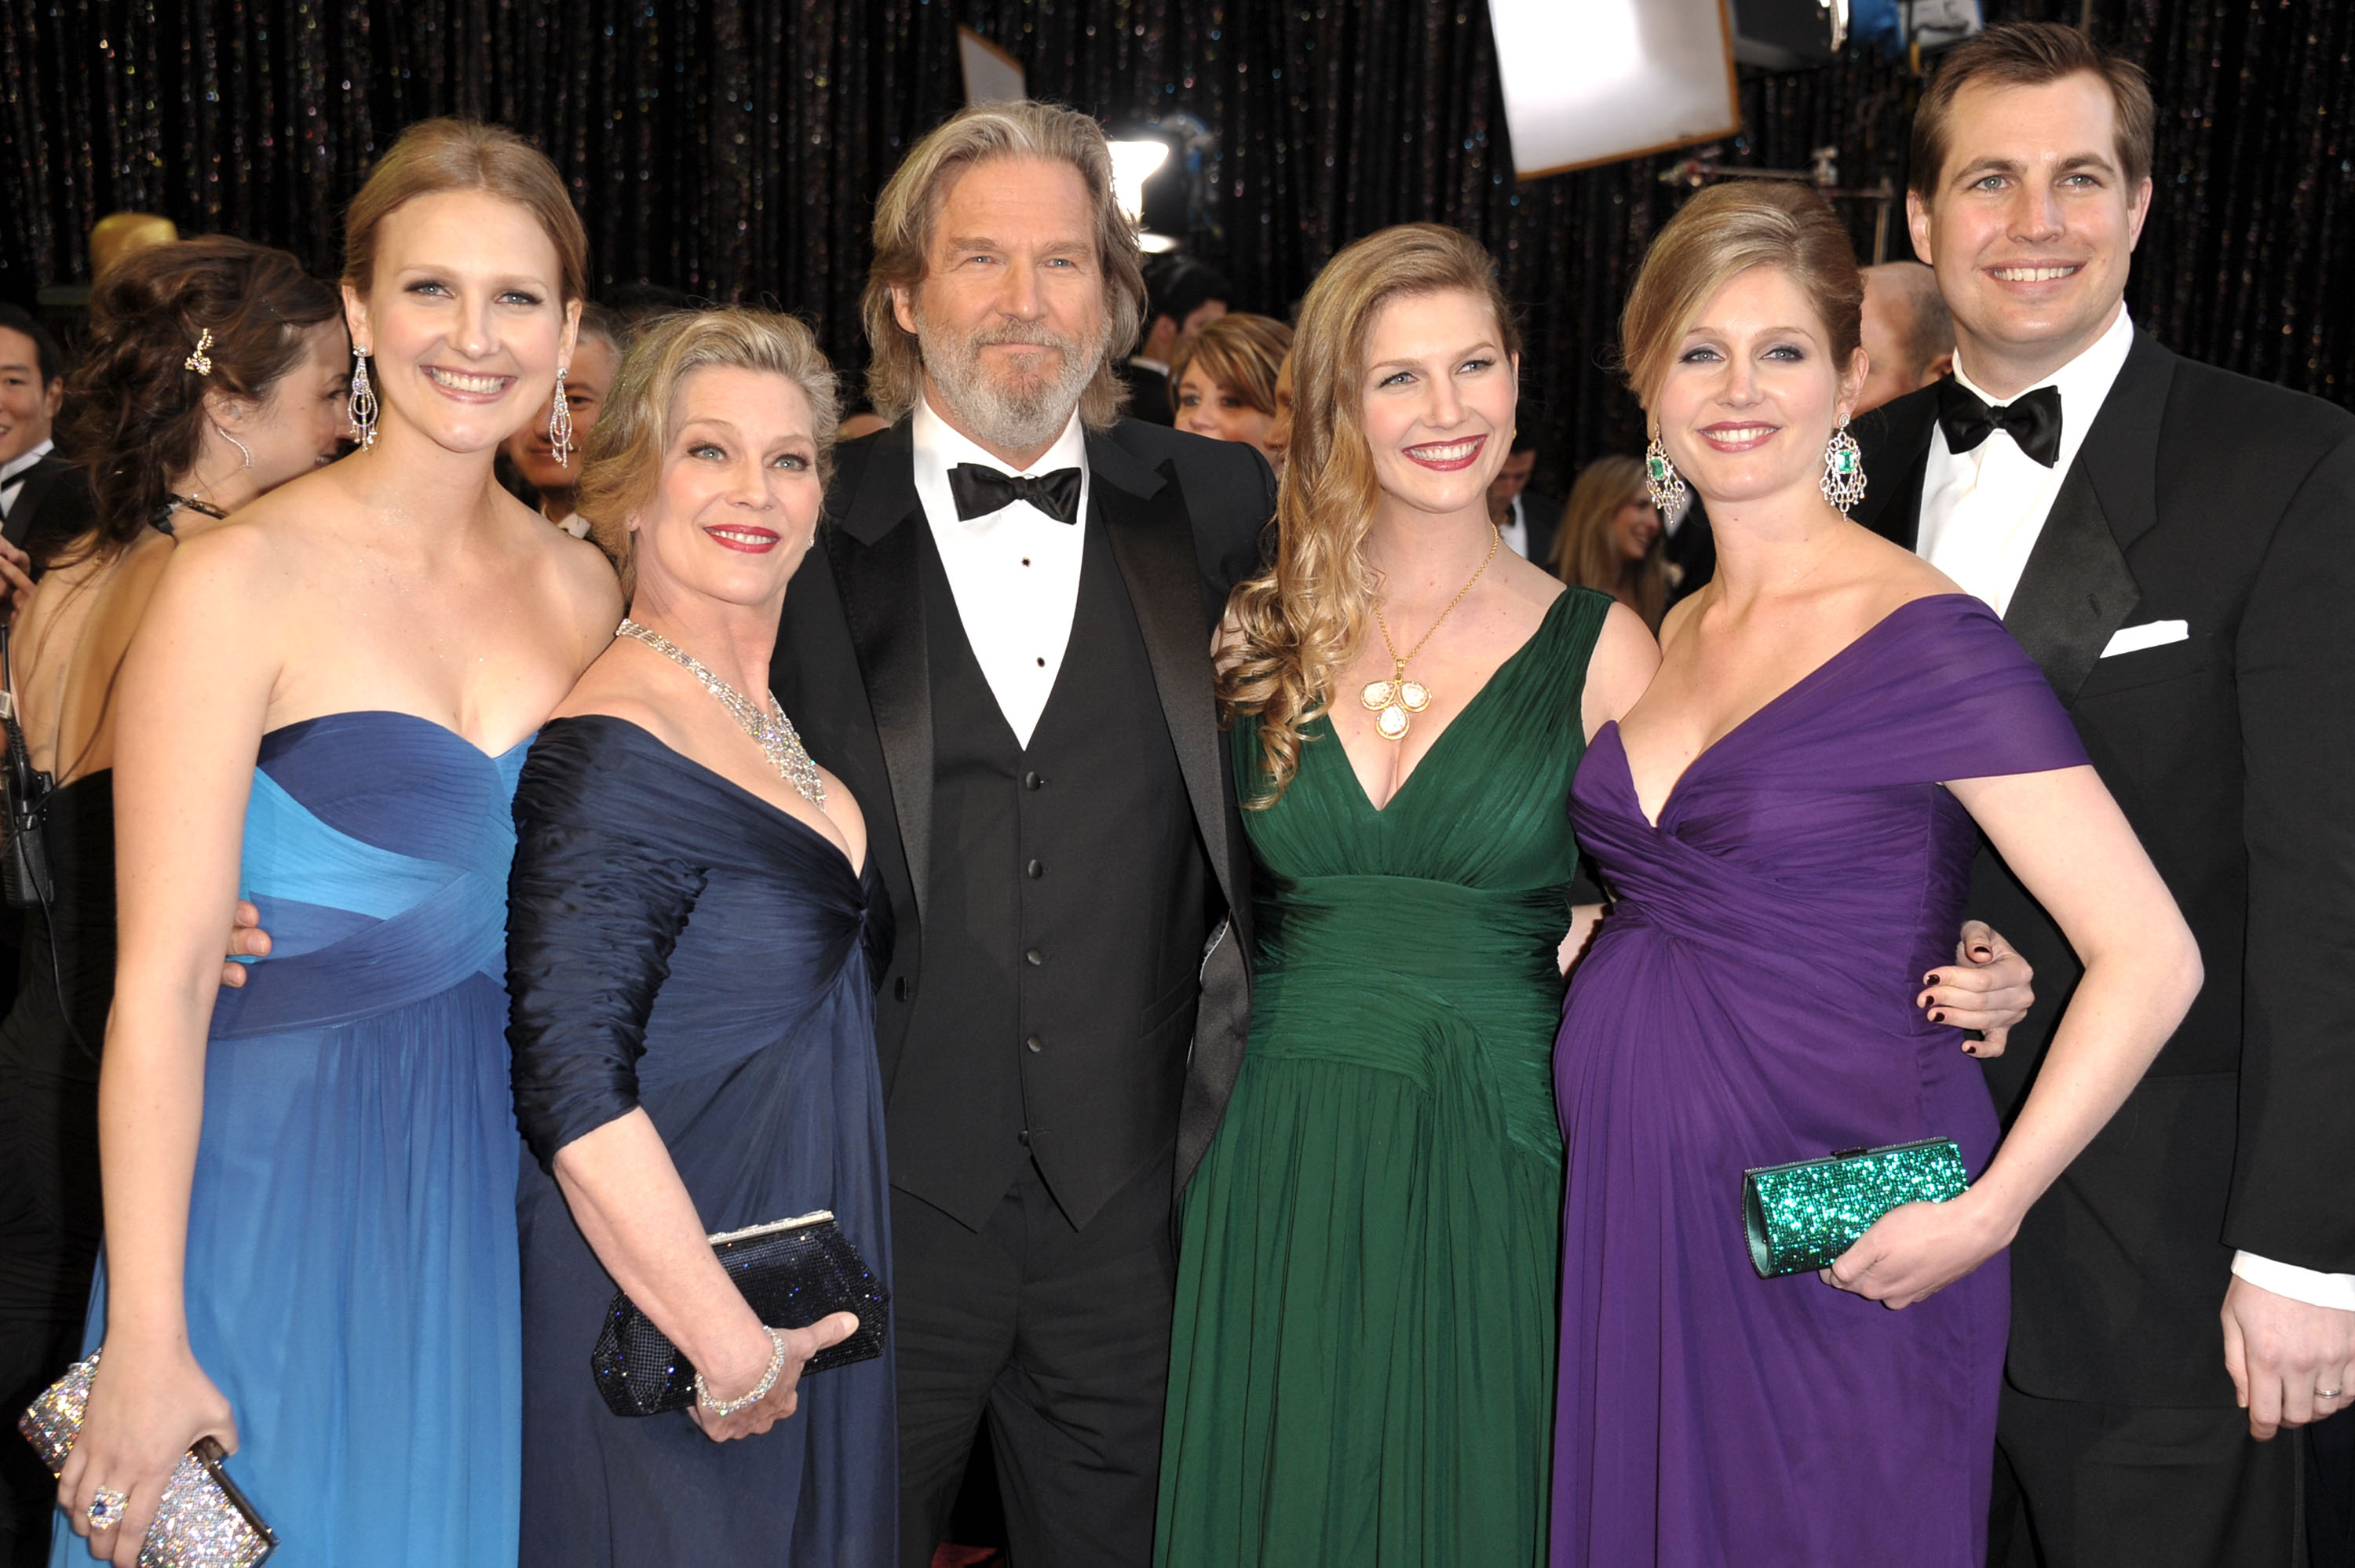 Jeff Bridges (C), wife Susan Bridges (2nd L) and family arrive at the 83rd Annual Academy Awards held at the Kodak Theatre on February 27, 2011 in Hollywood, California | Source: Getty Images